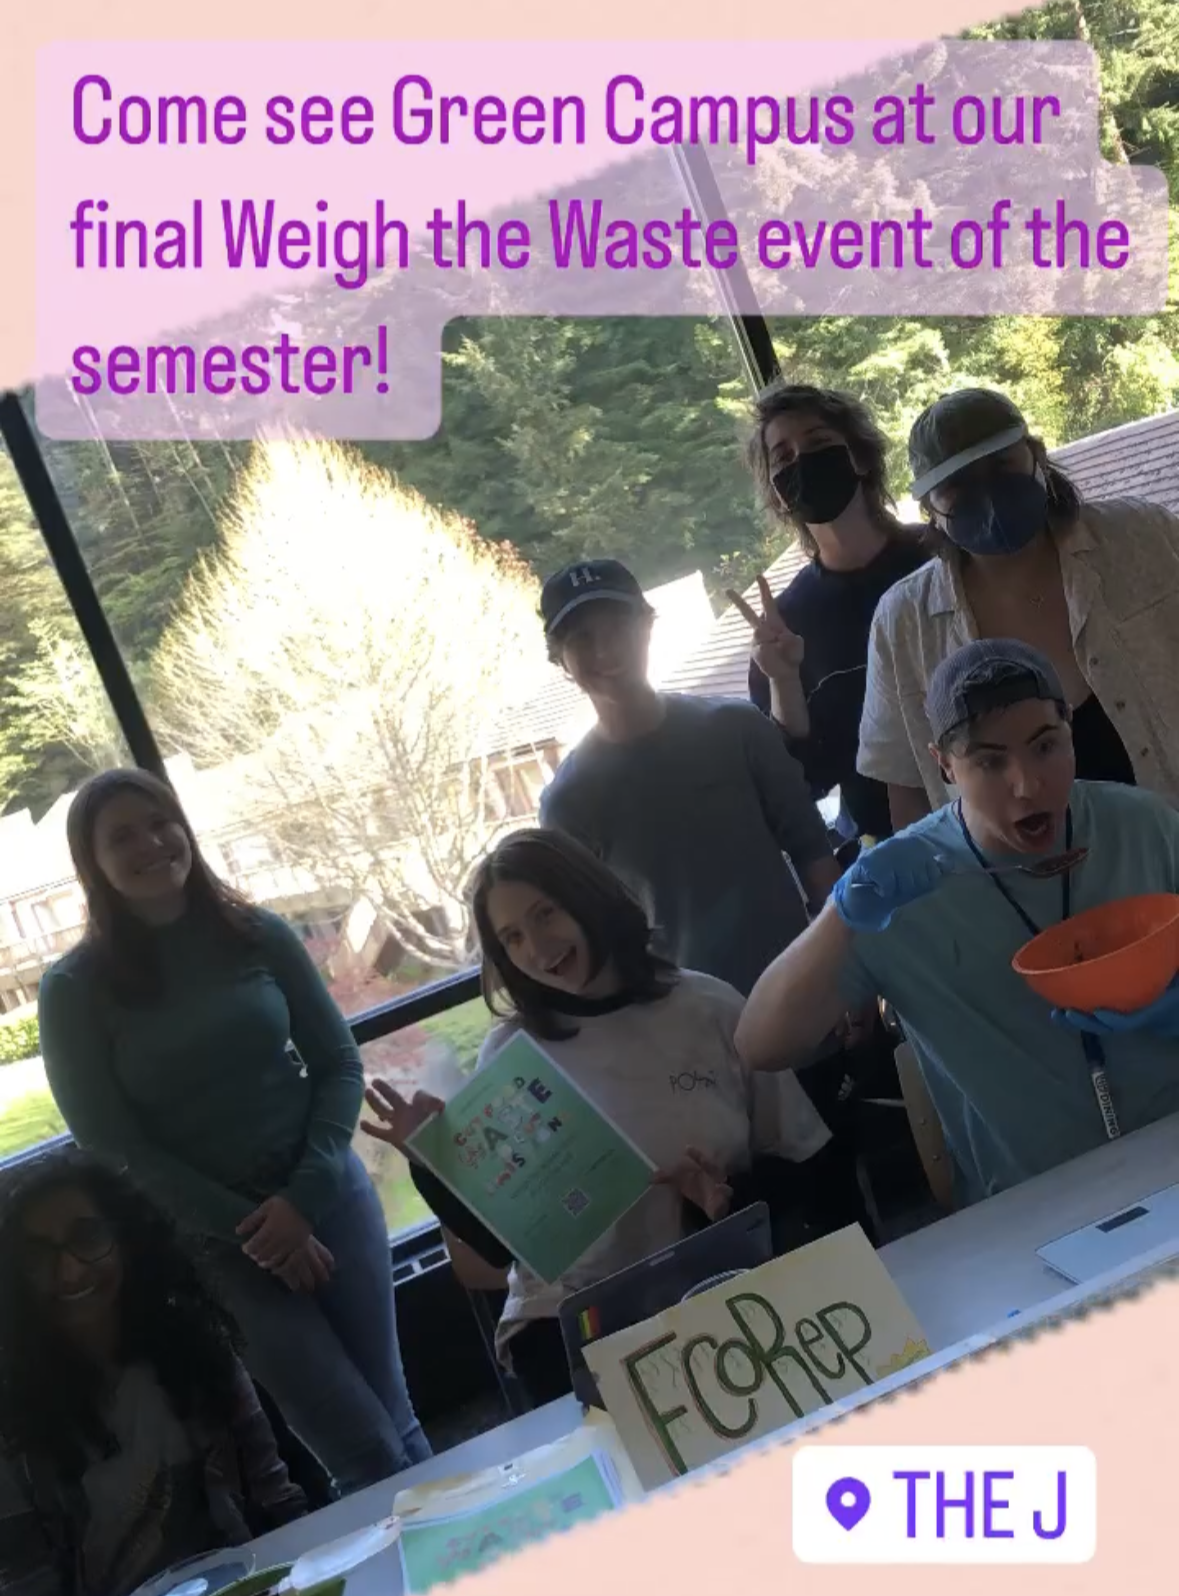 Photo from a Weigh the Waste event, the text says, "come see Green Campus at our final Weigh the Waste Event of the semester!", the location was at the J dining hall